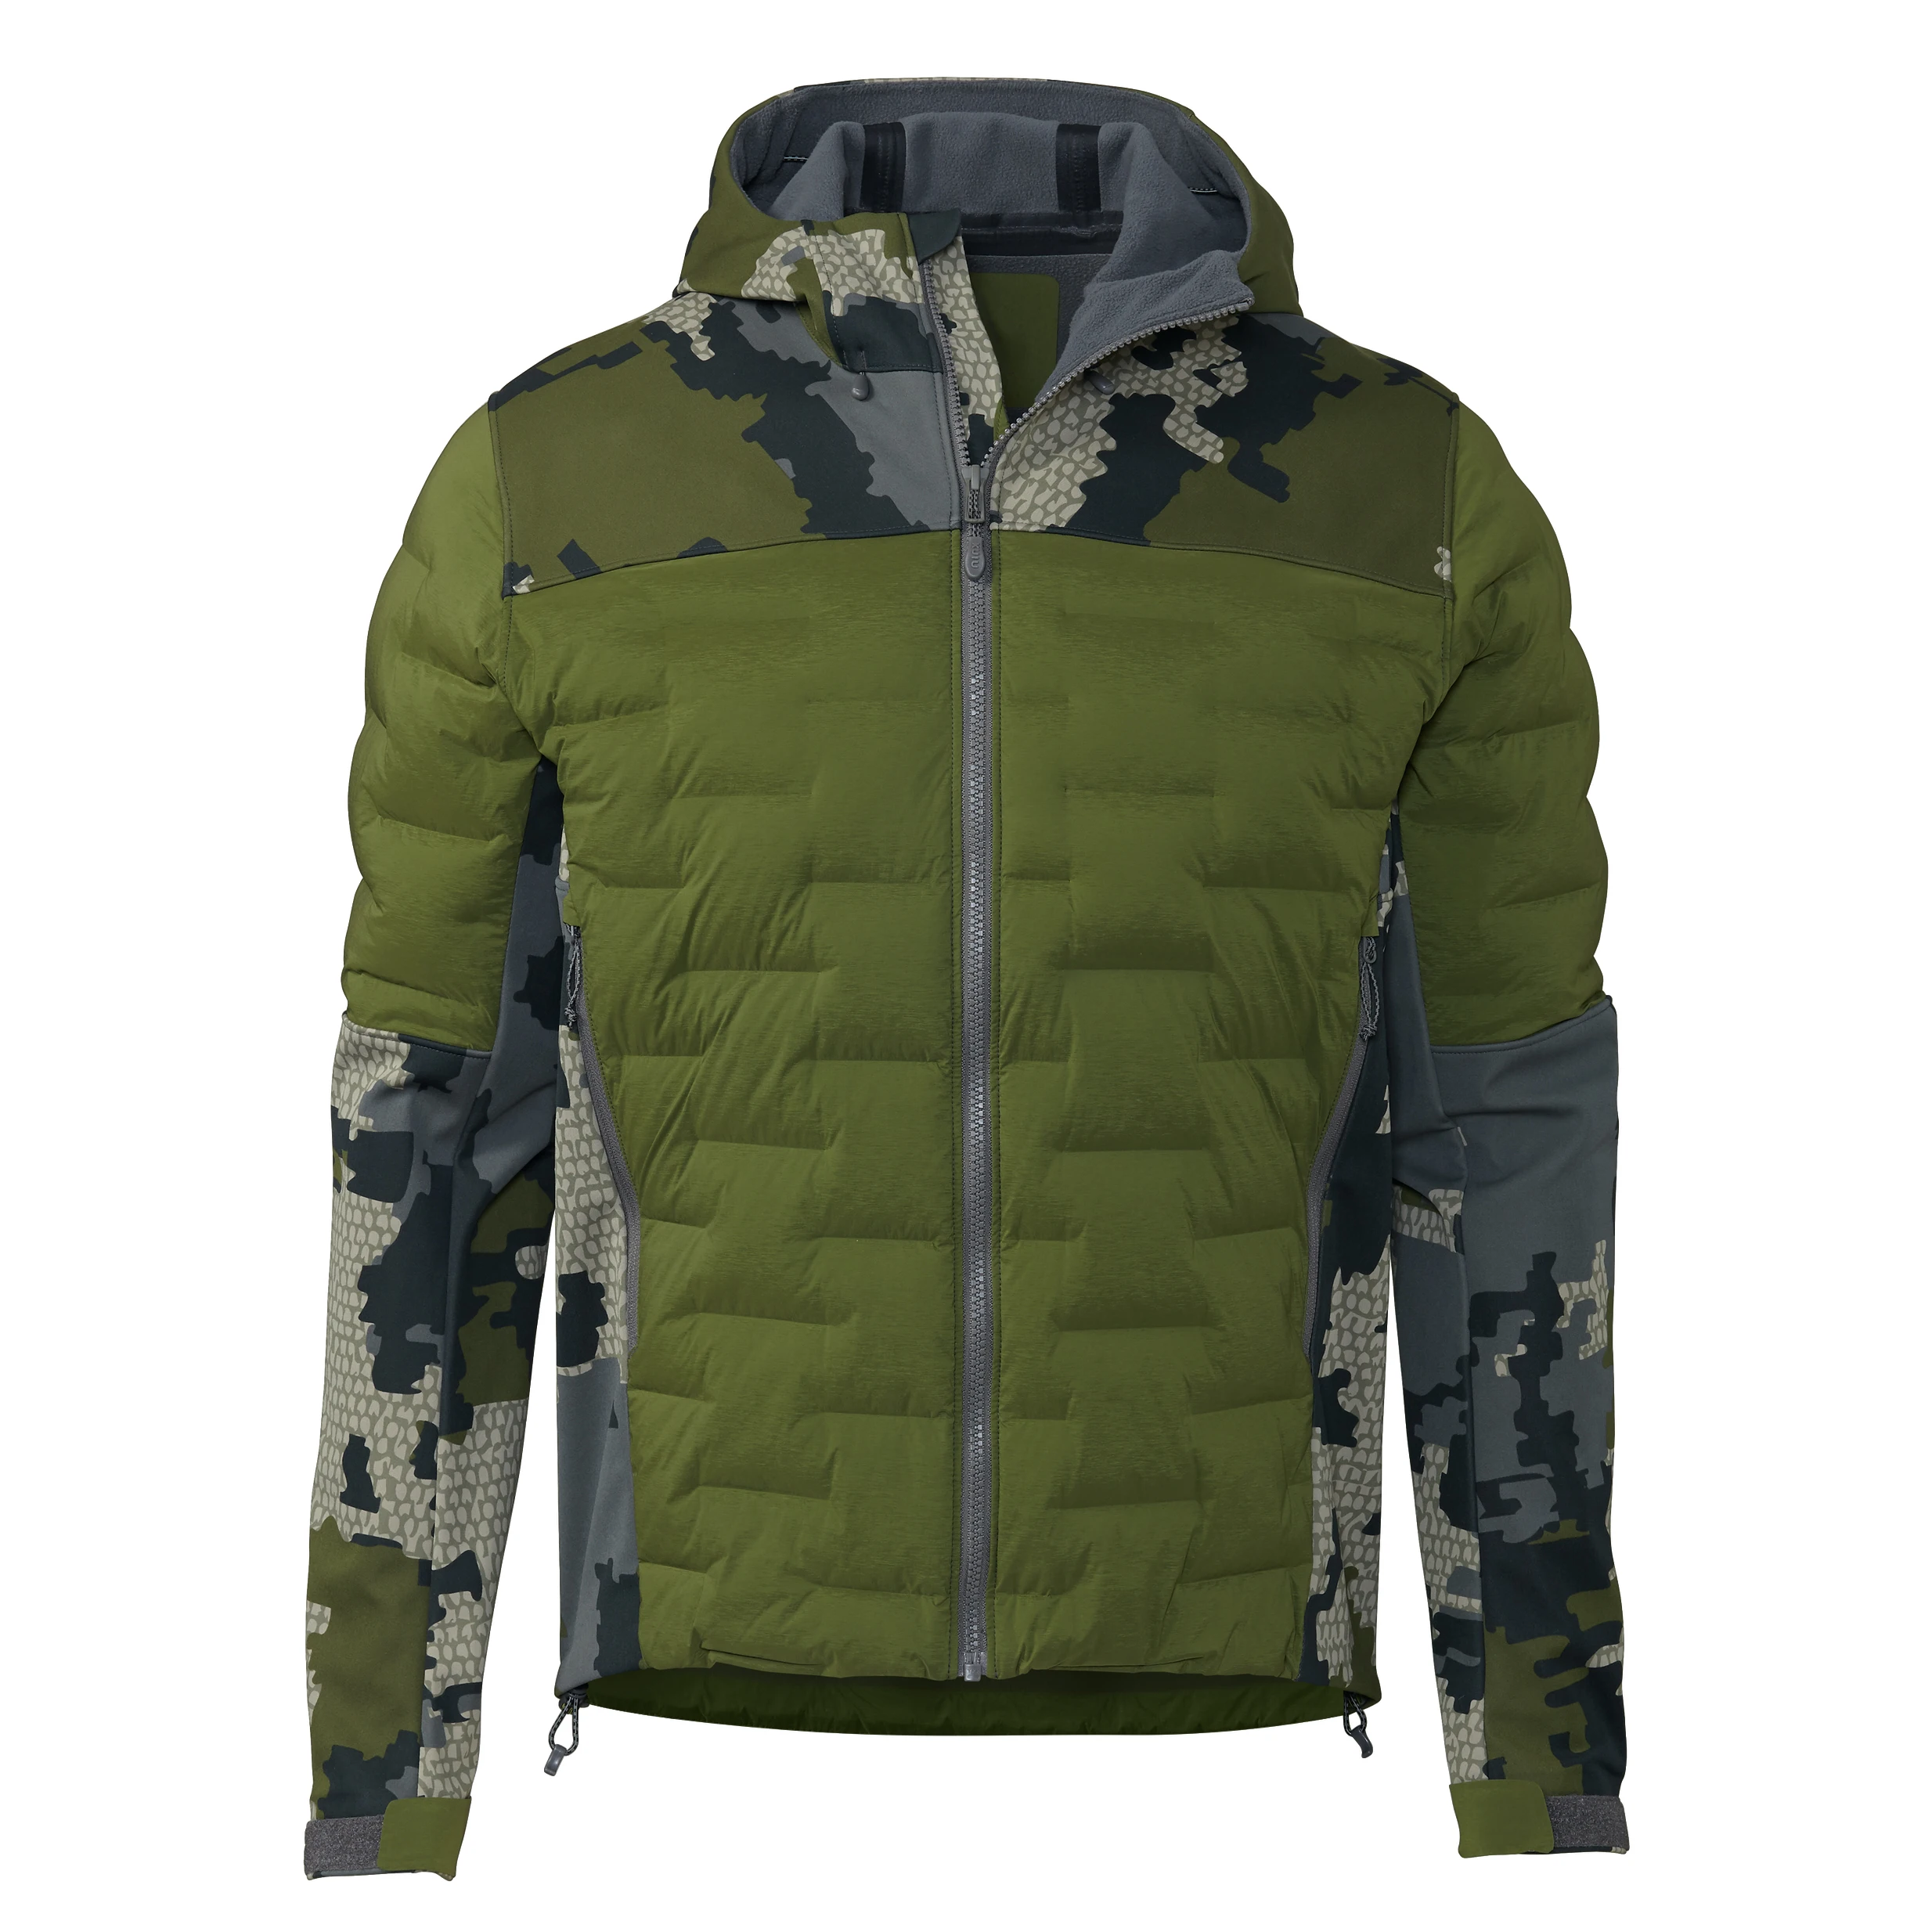 Best Selling Hunting Down Jacket With Insulated Waterproof Seam Tape ...